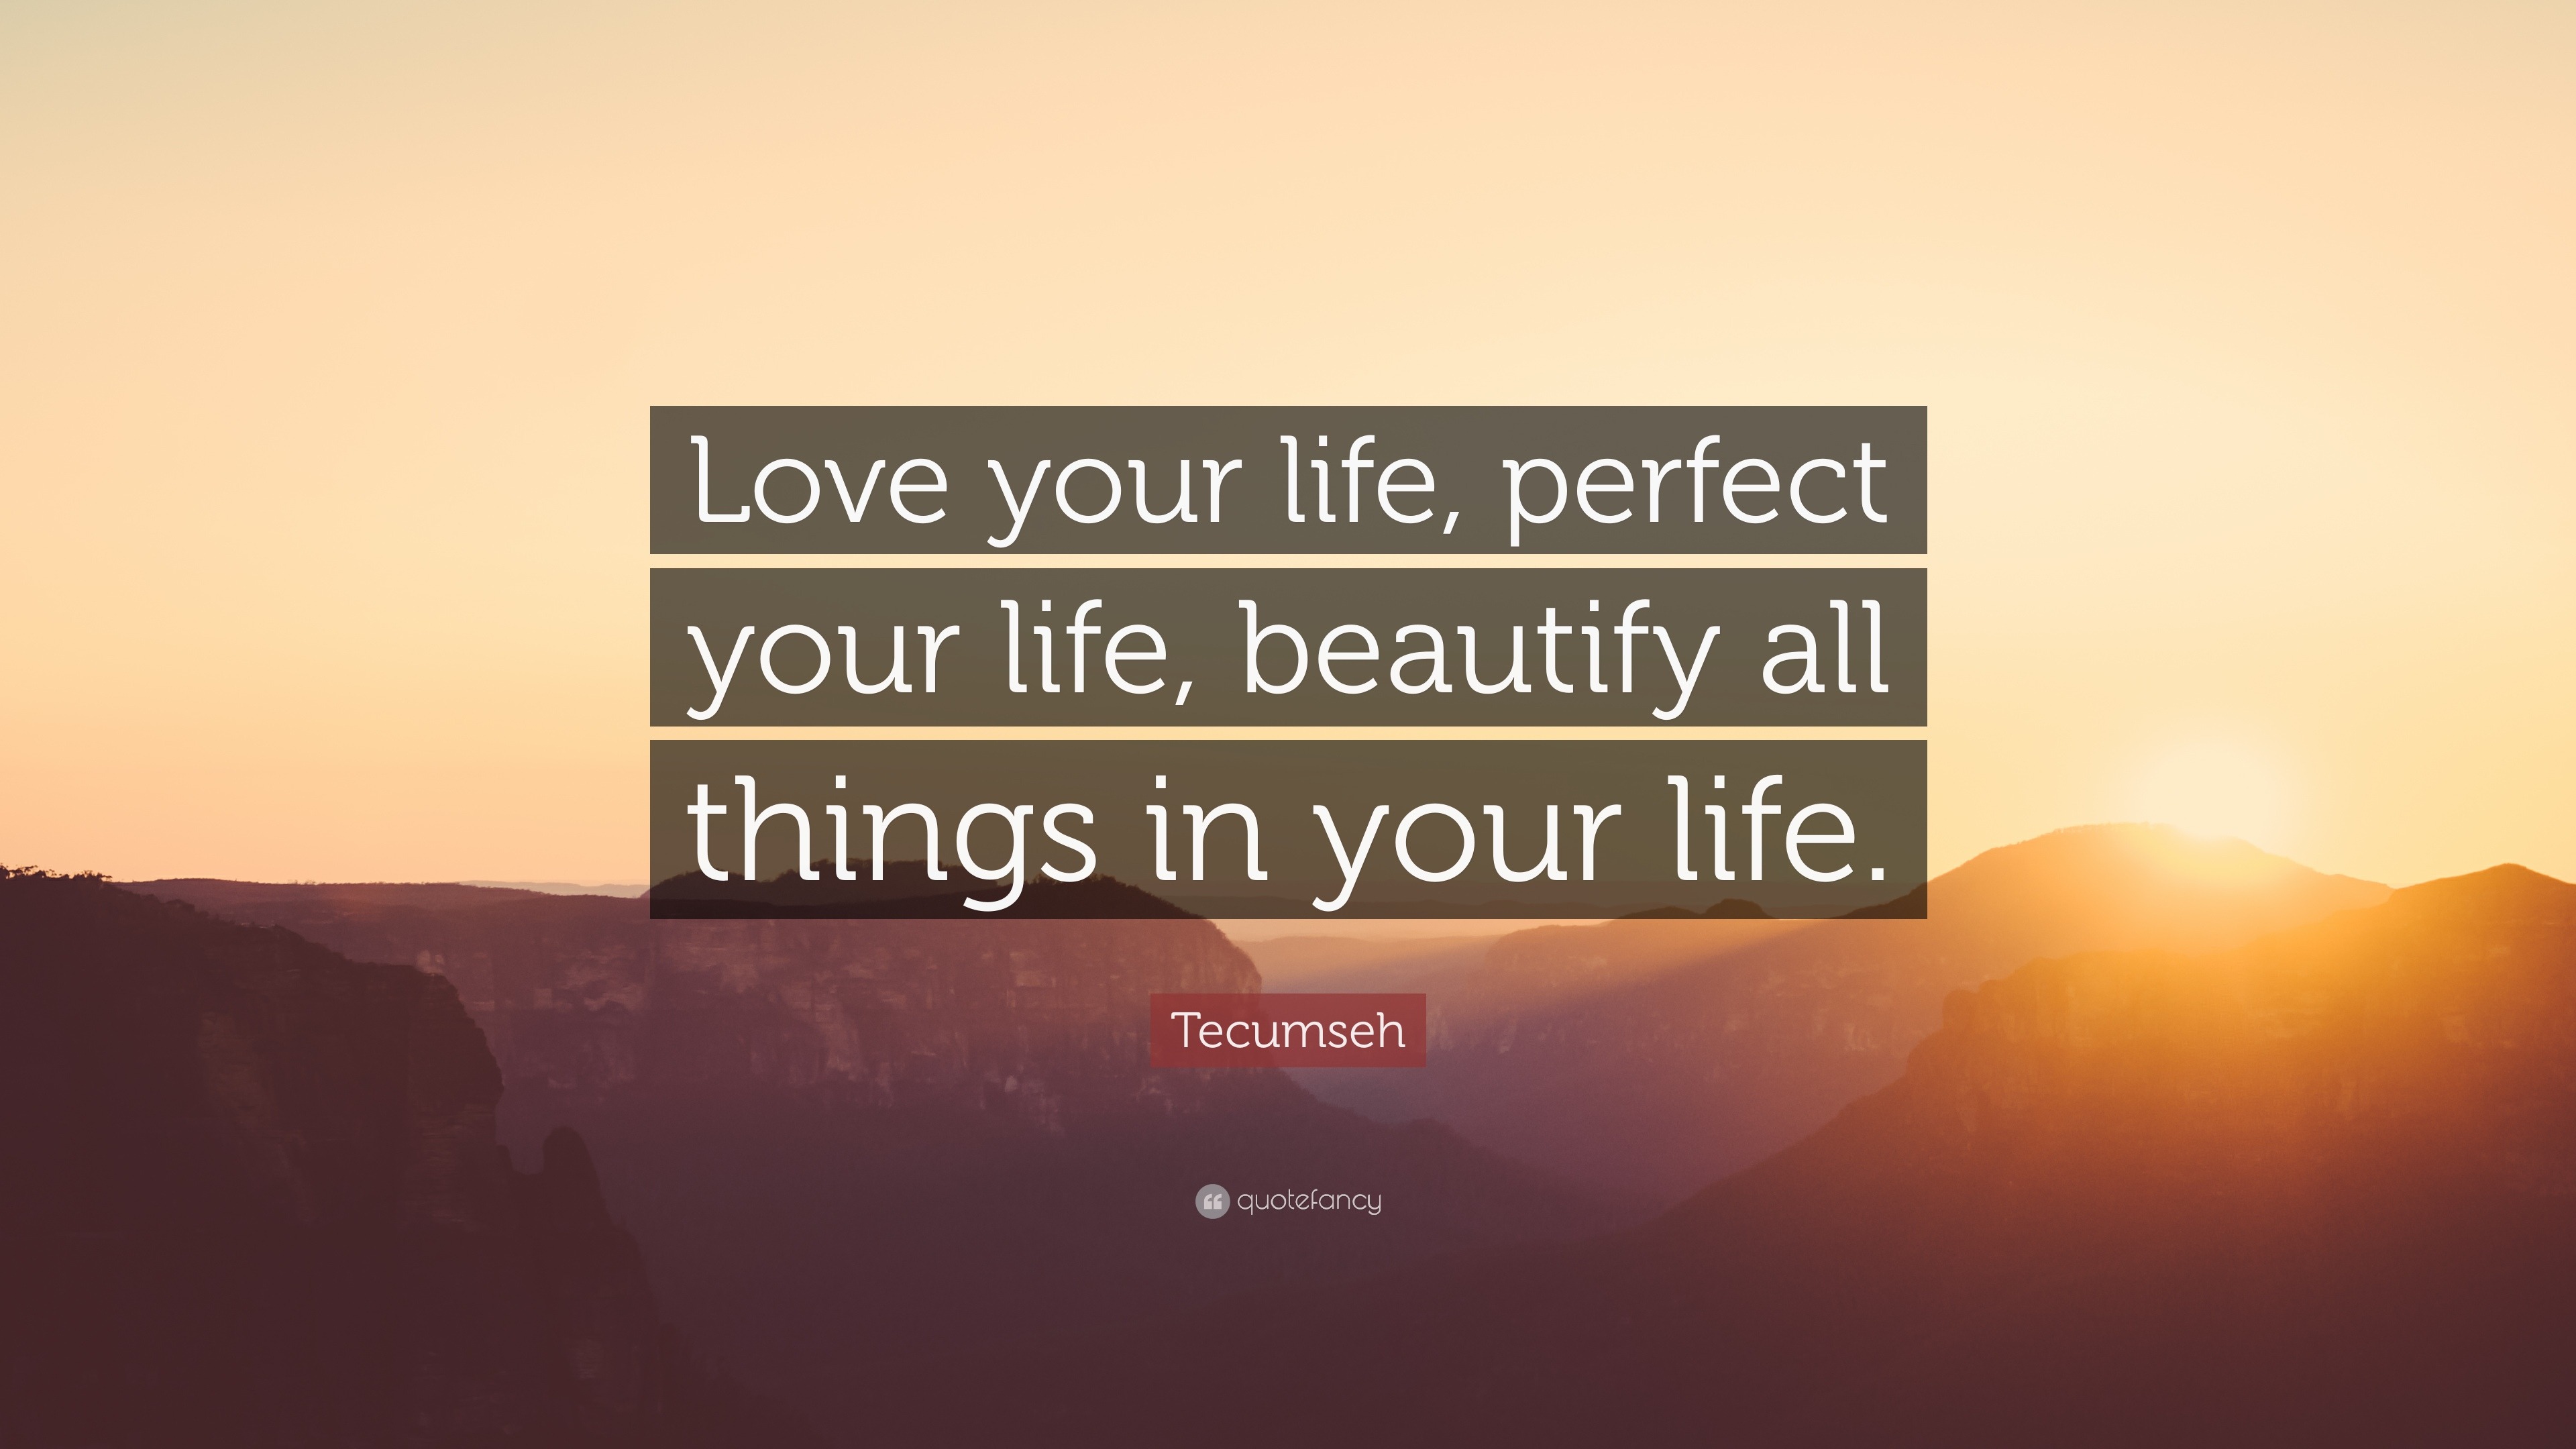 Tecumseh Quote “Love your life perfect your life beautify all things in